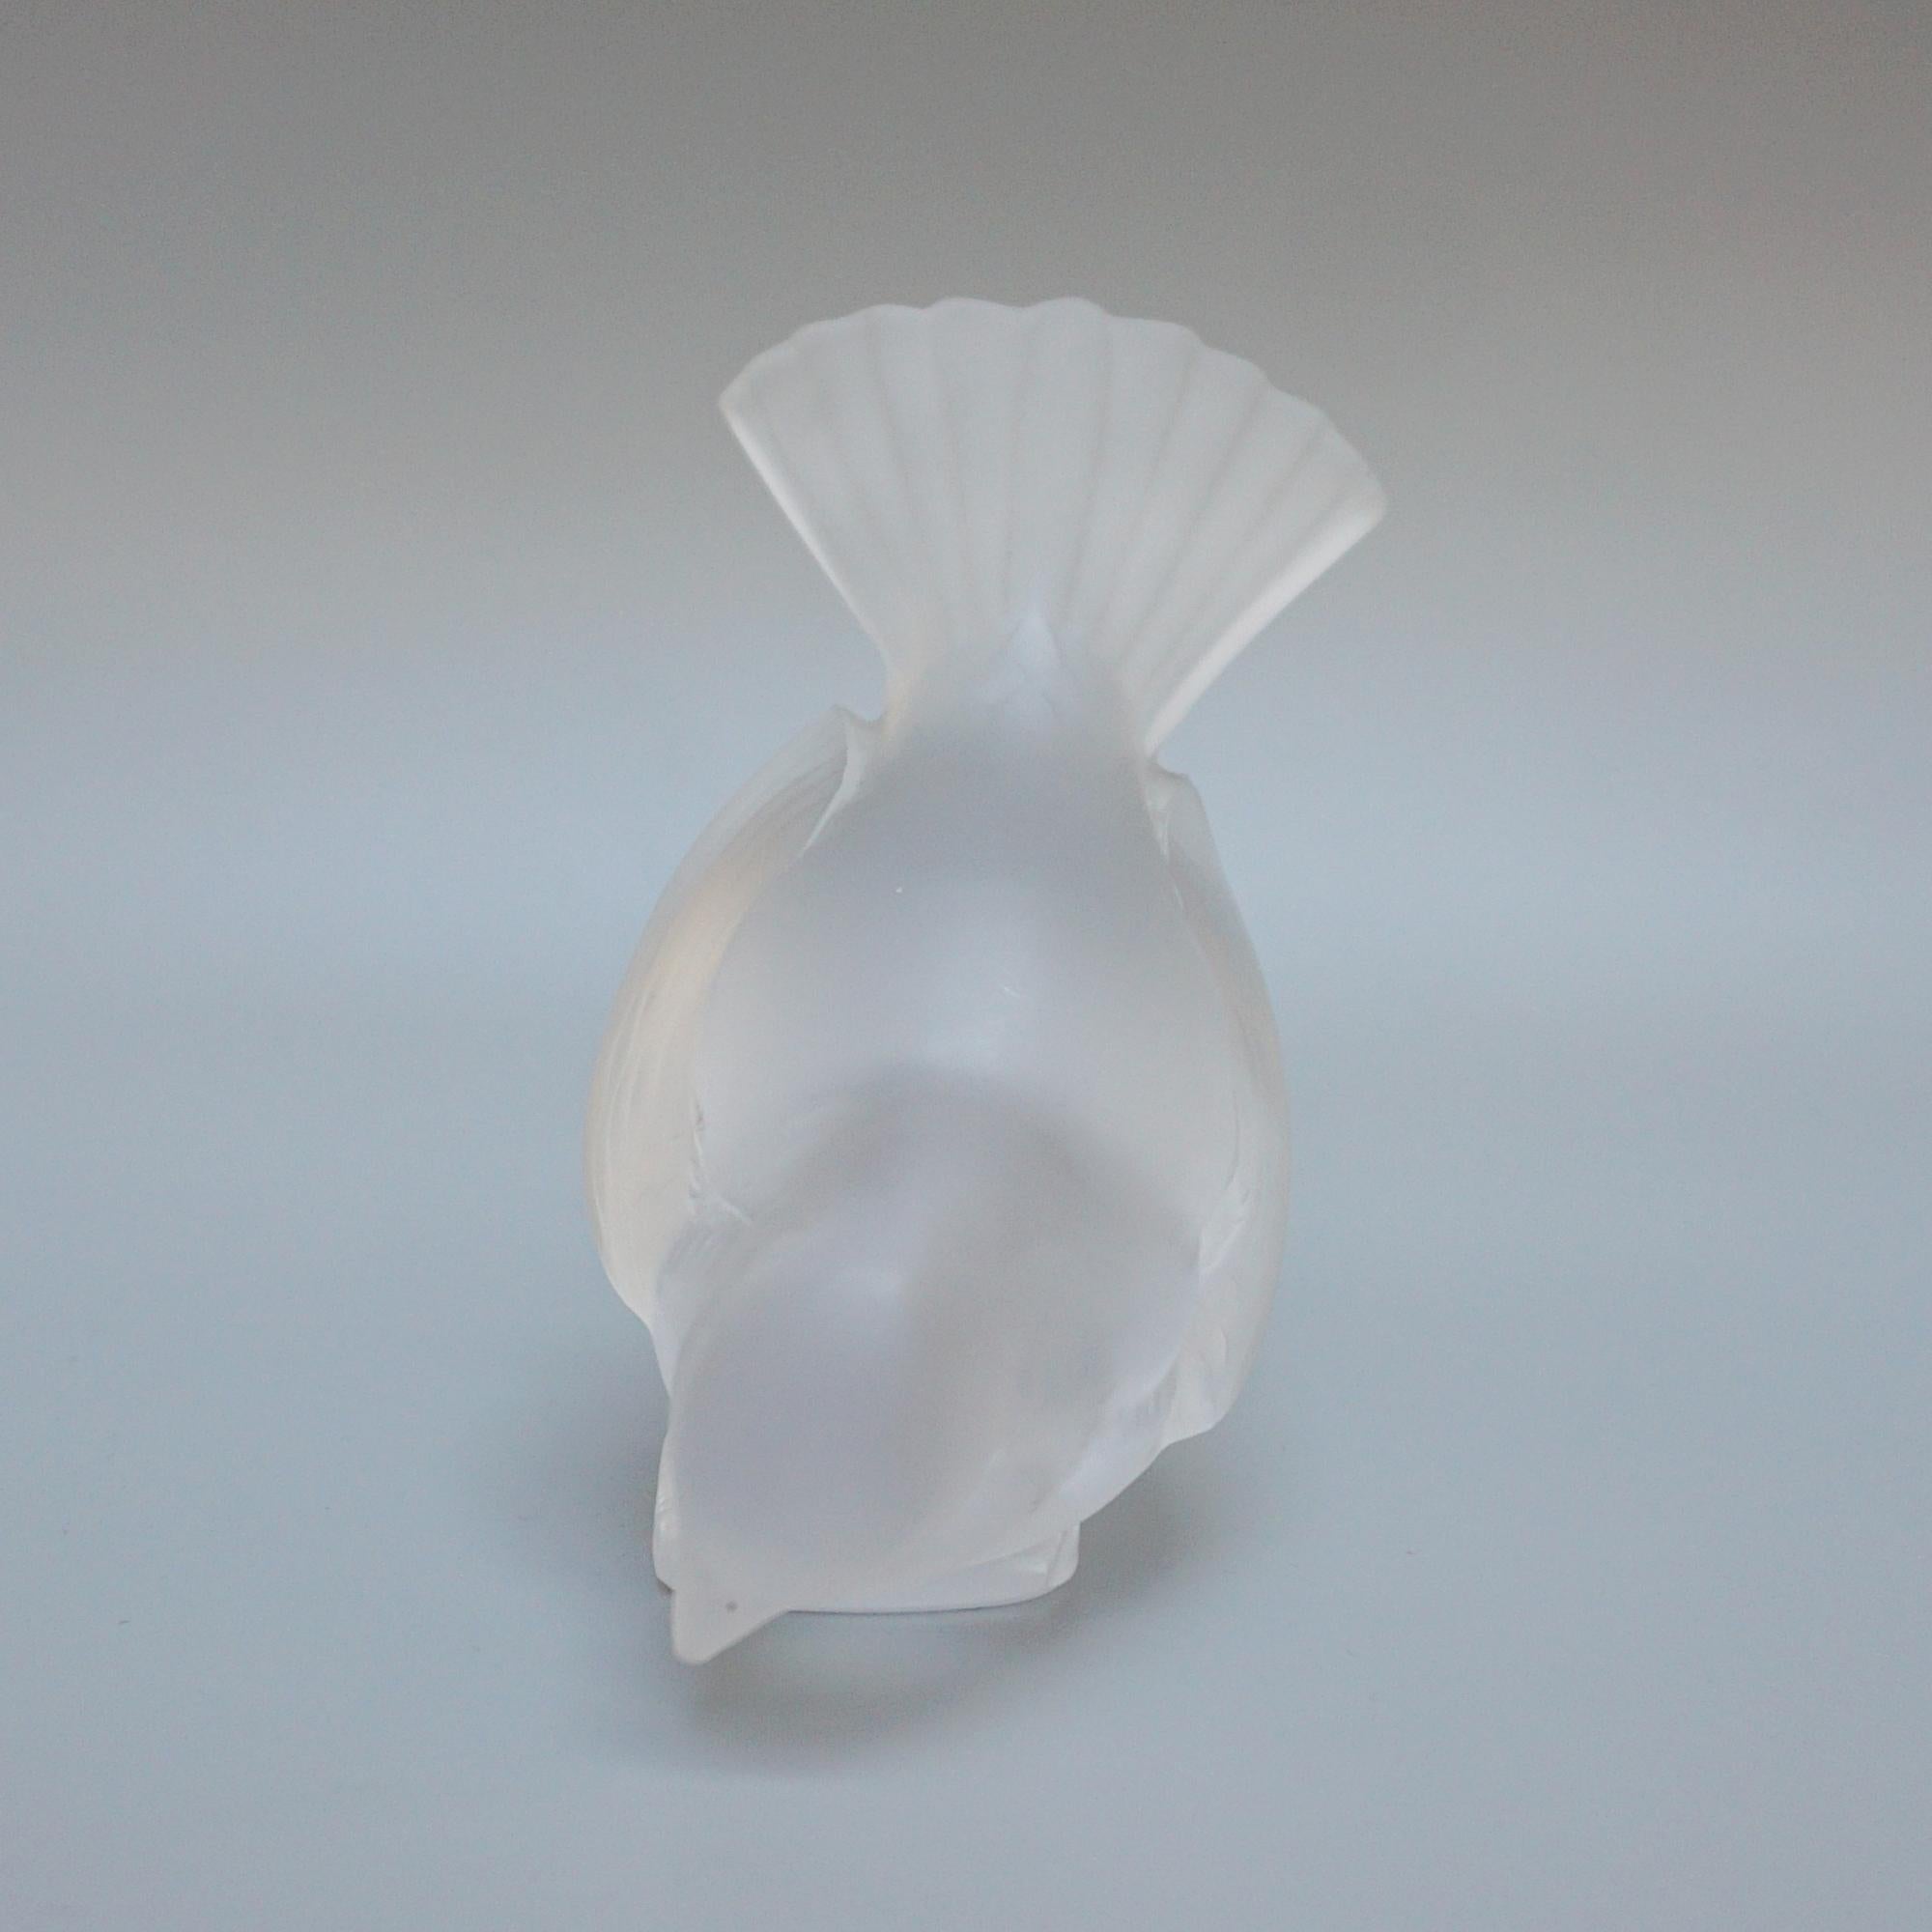 'Moineau Timide' A Glass Paperweight by Marc Lalique (1900 - 1977) For Sale 6